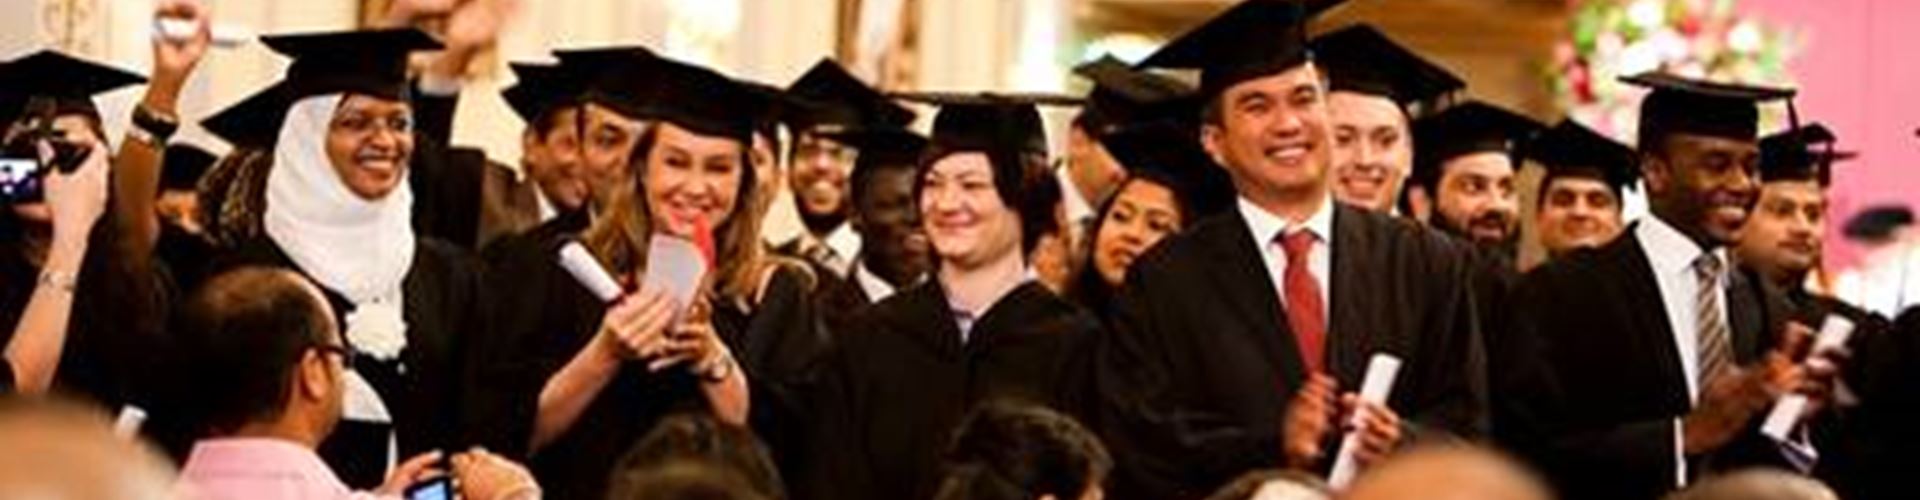 Biggest drop in UK graduate unemployment for 15 years